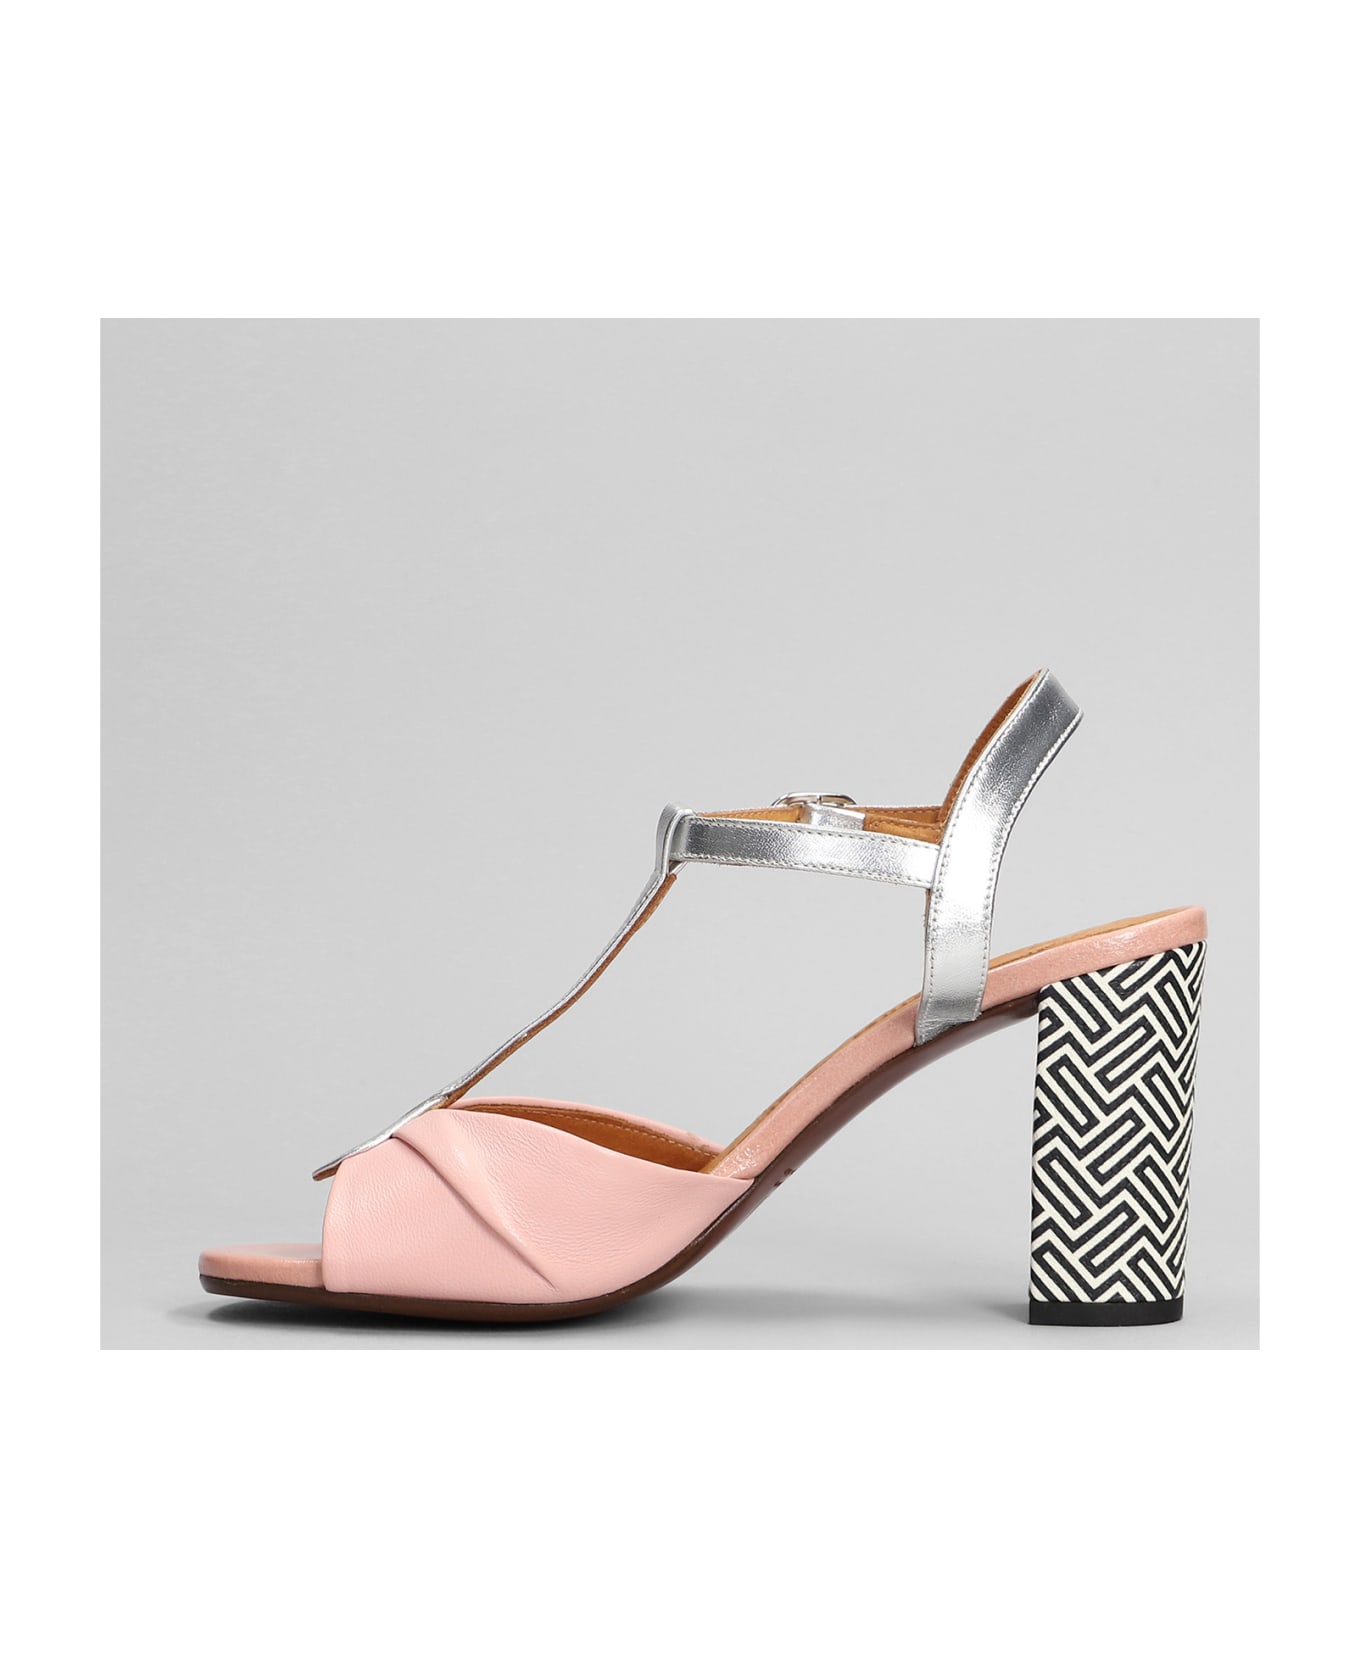 Chie Mihara Biagio Sandals In Rose-pink Leather - rose-pink サンダル